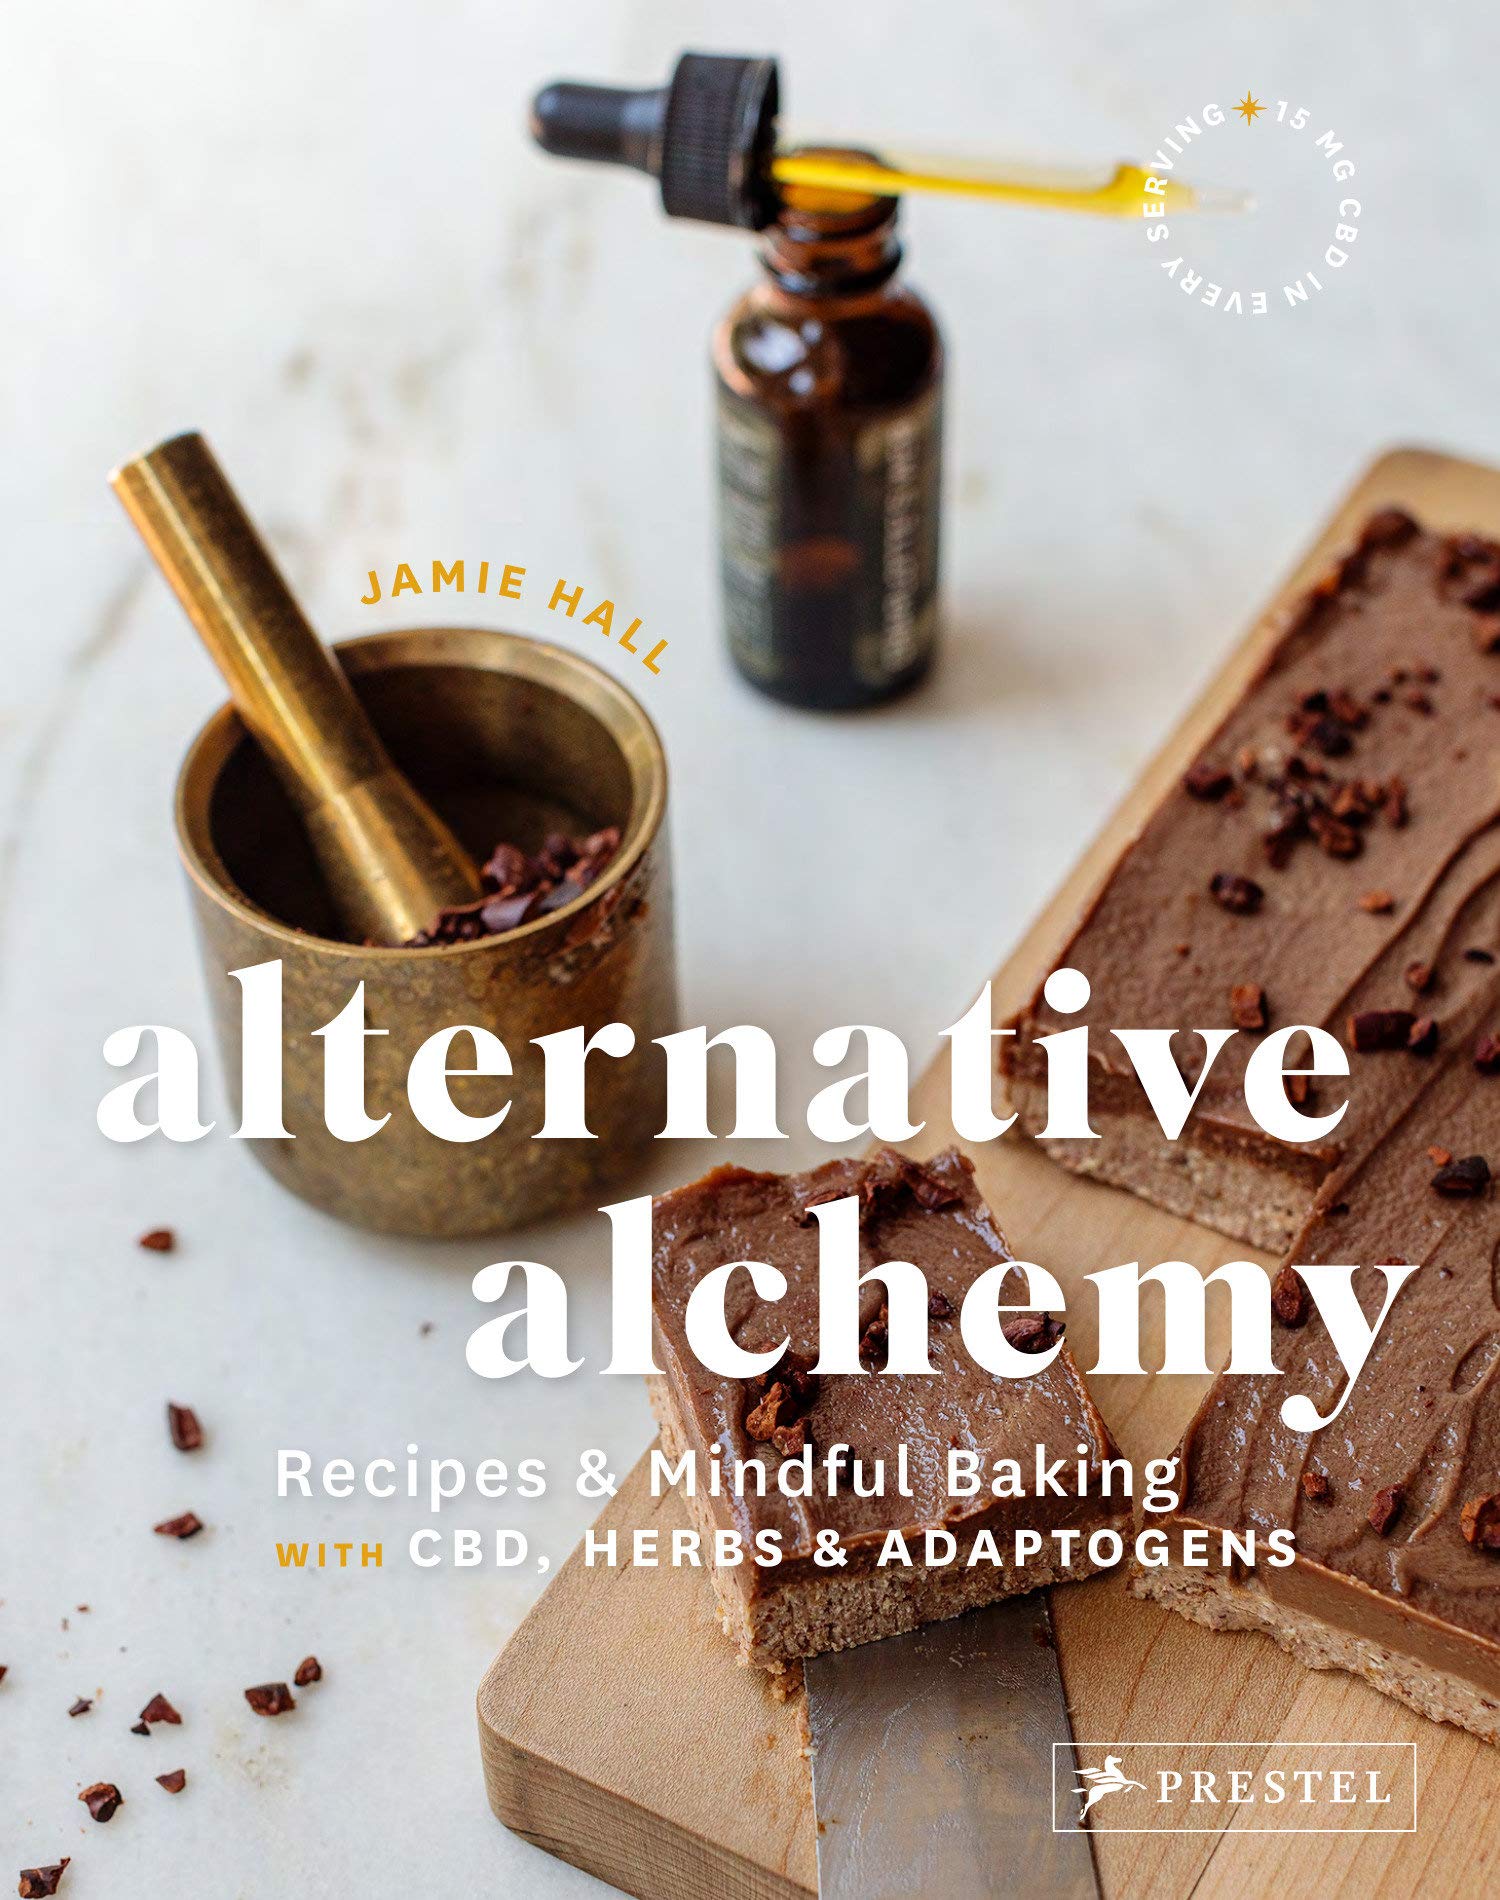 Alternative Alchemy: Recipes and Mindful Baking with CBD, Herbs, and Adaptogens (Jamie Hall)